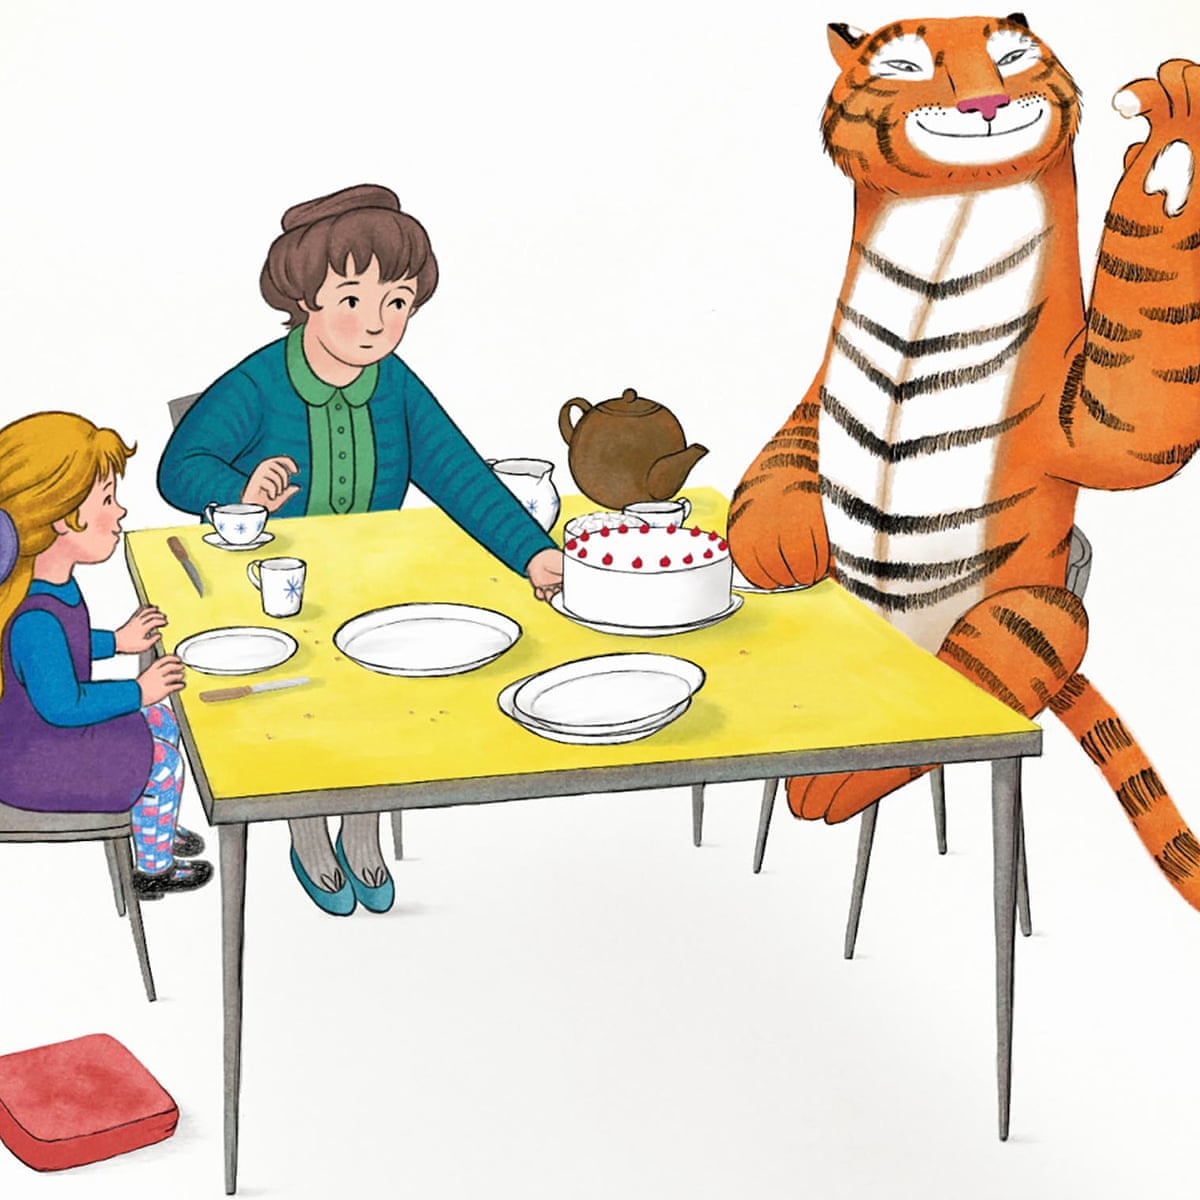 He's the Roger Moore of tigers!' – how The Tiger Who Came to Tea came to TV  | Animation on TV | The Guardian